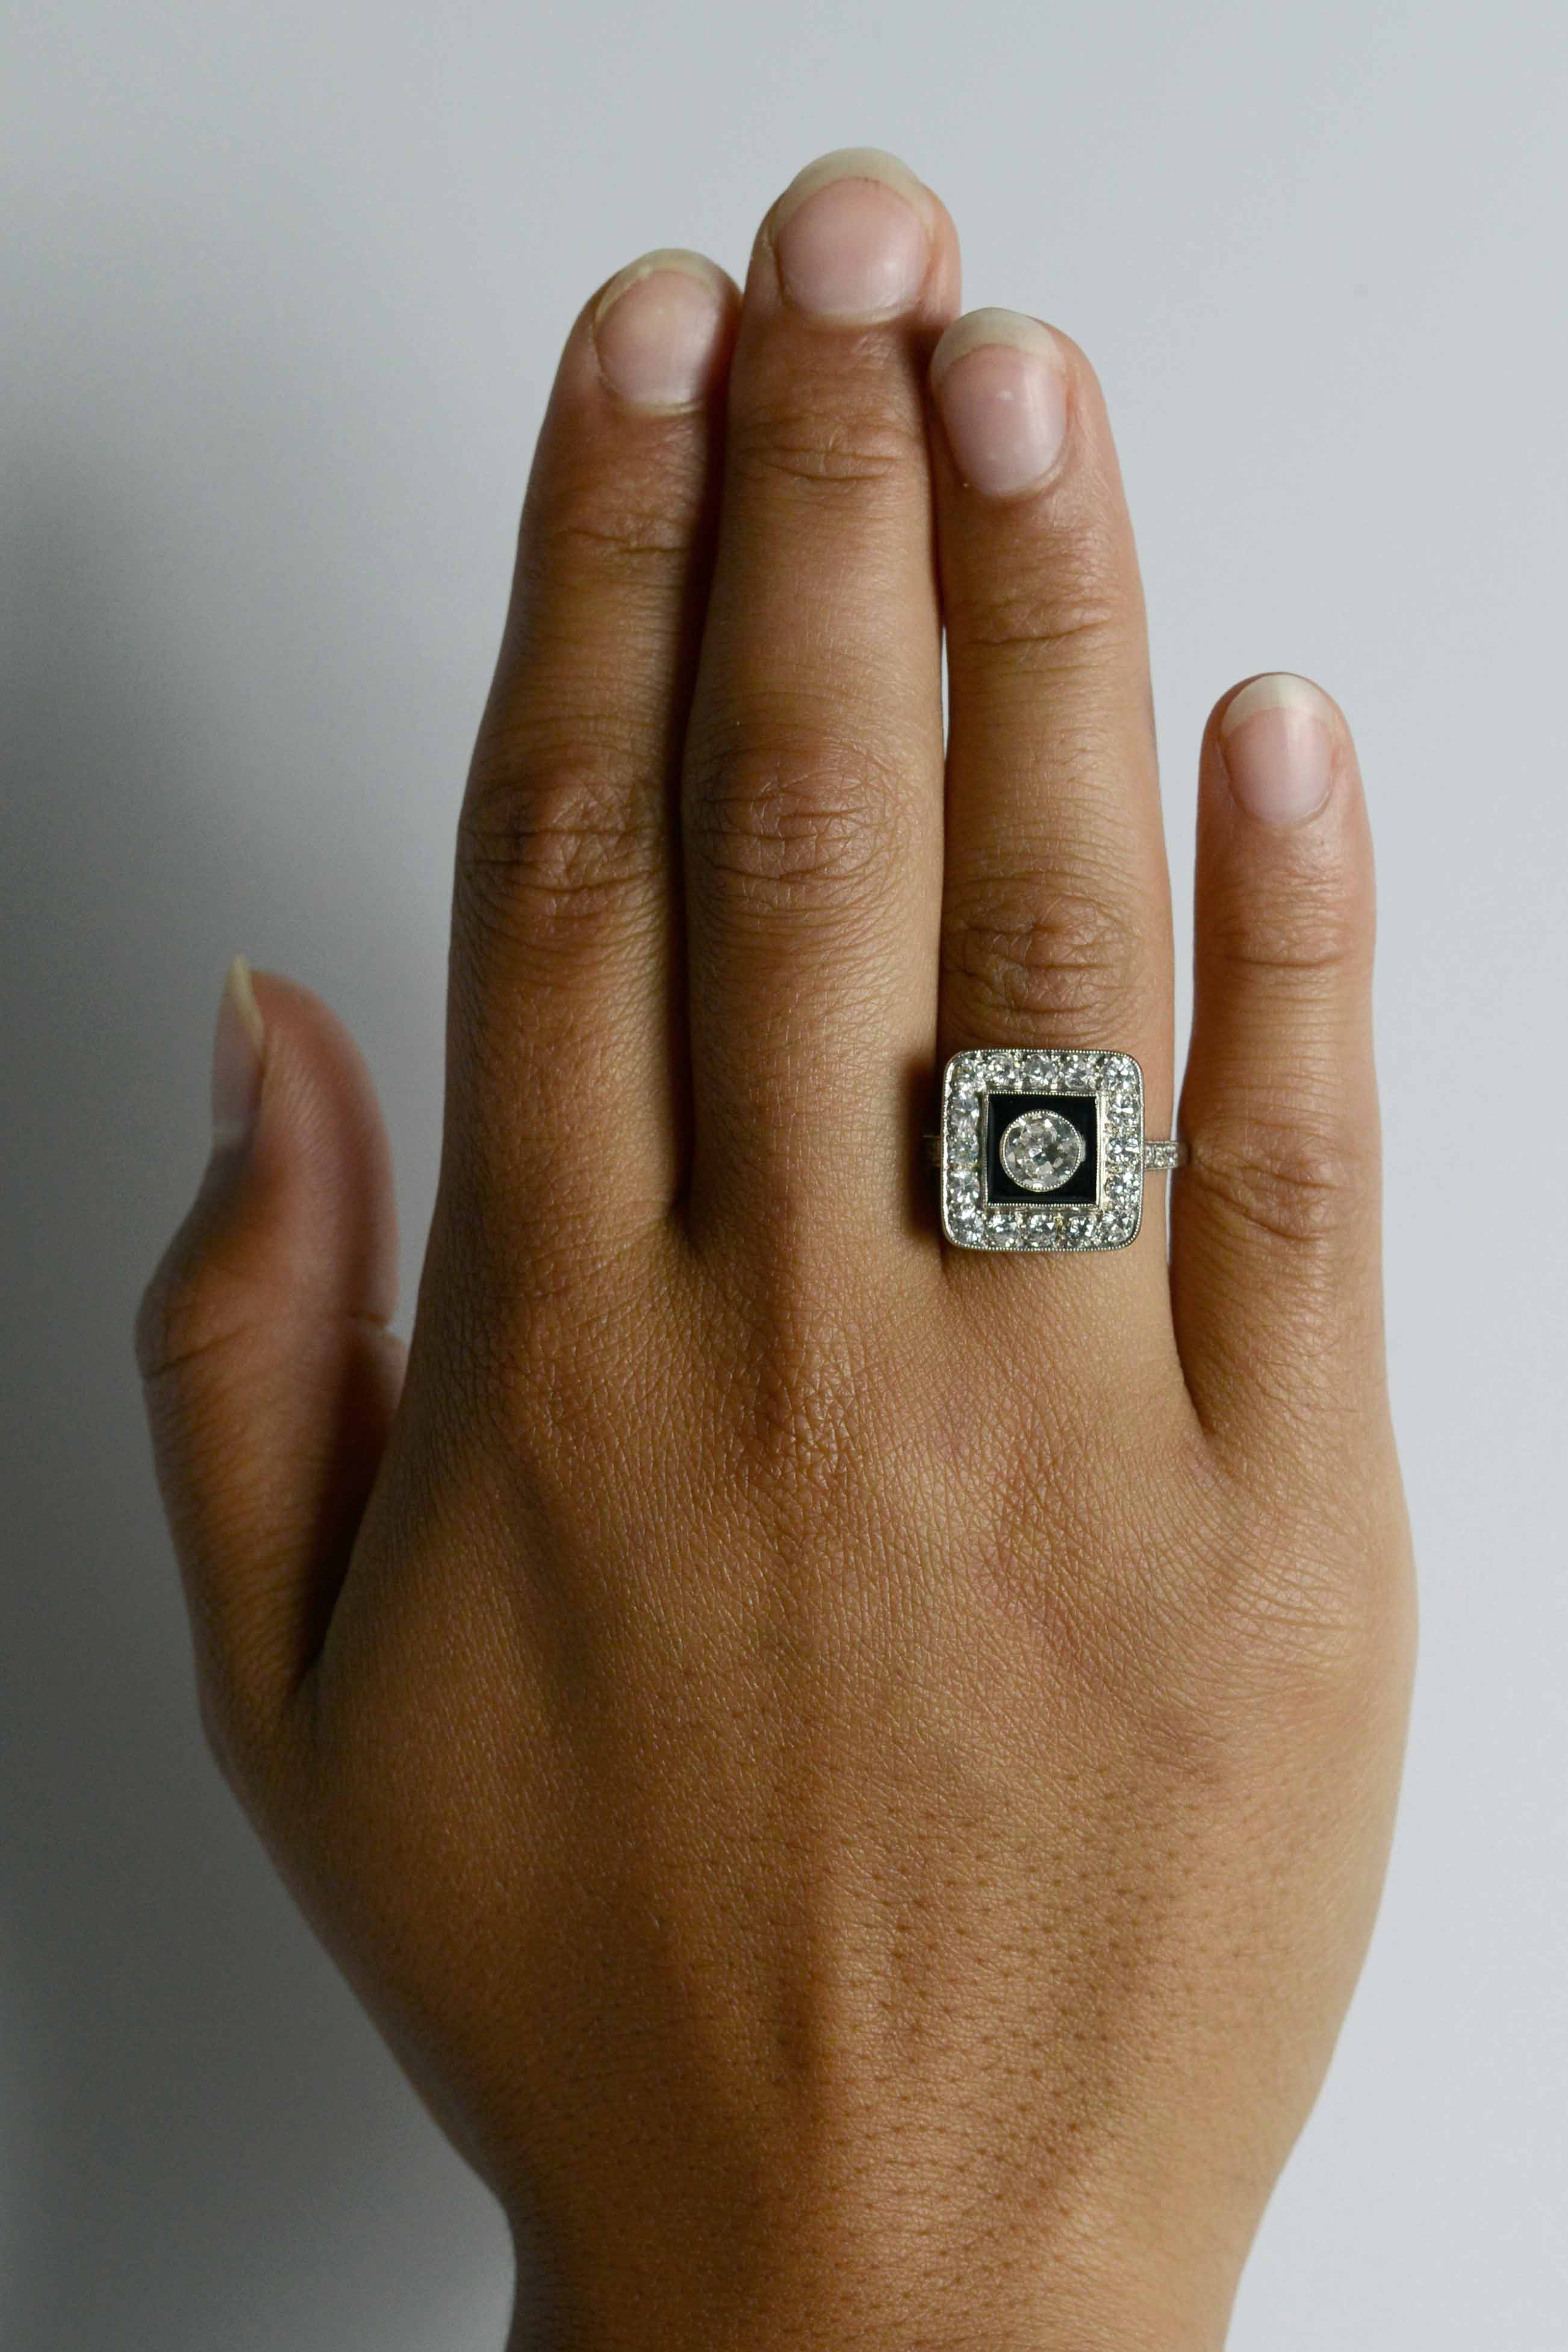 A square Art Deco wedding ring with diamonds and black onyx.